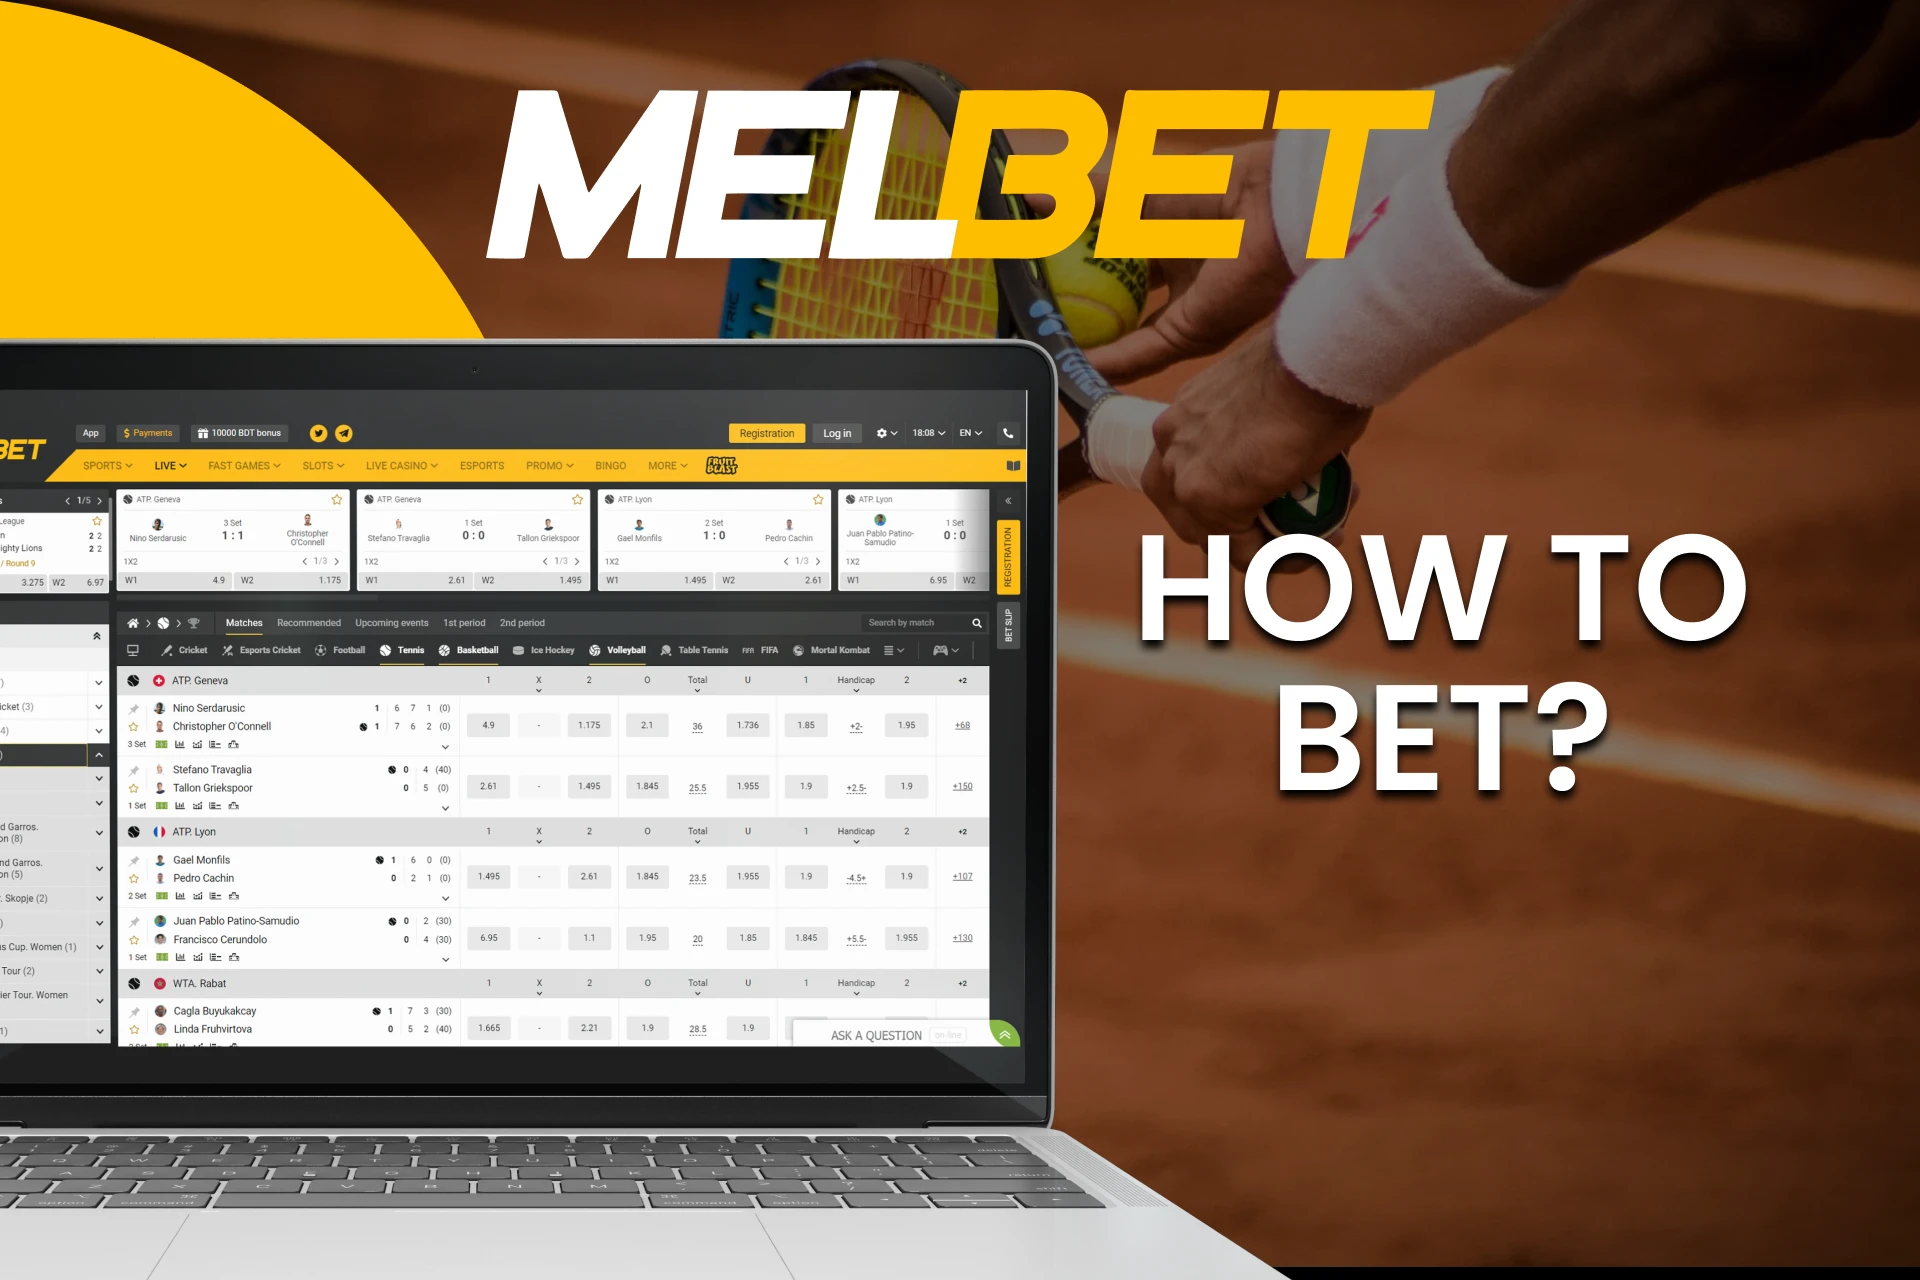 Go to the right section for betting on tennis from Melbet.